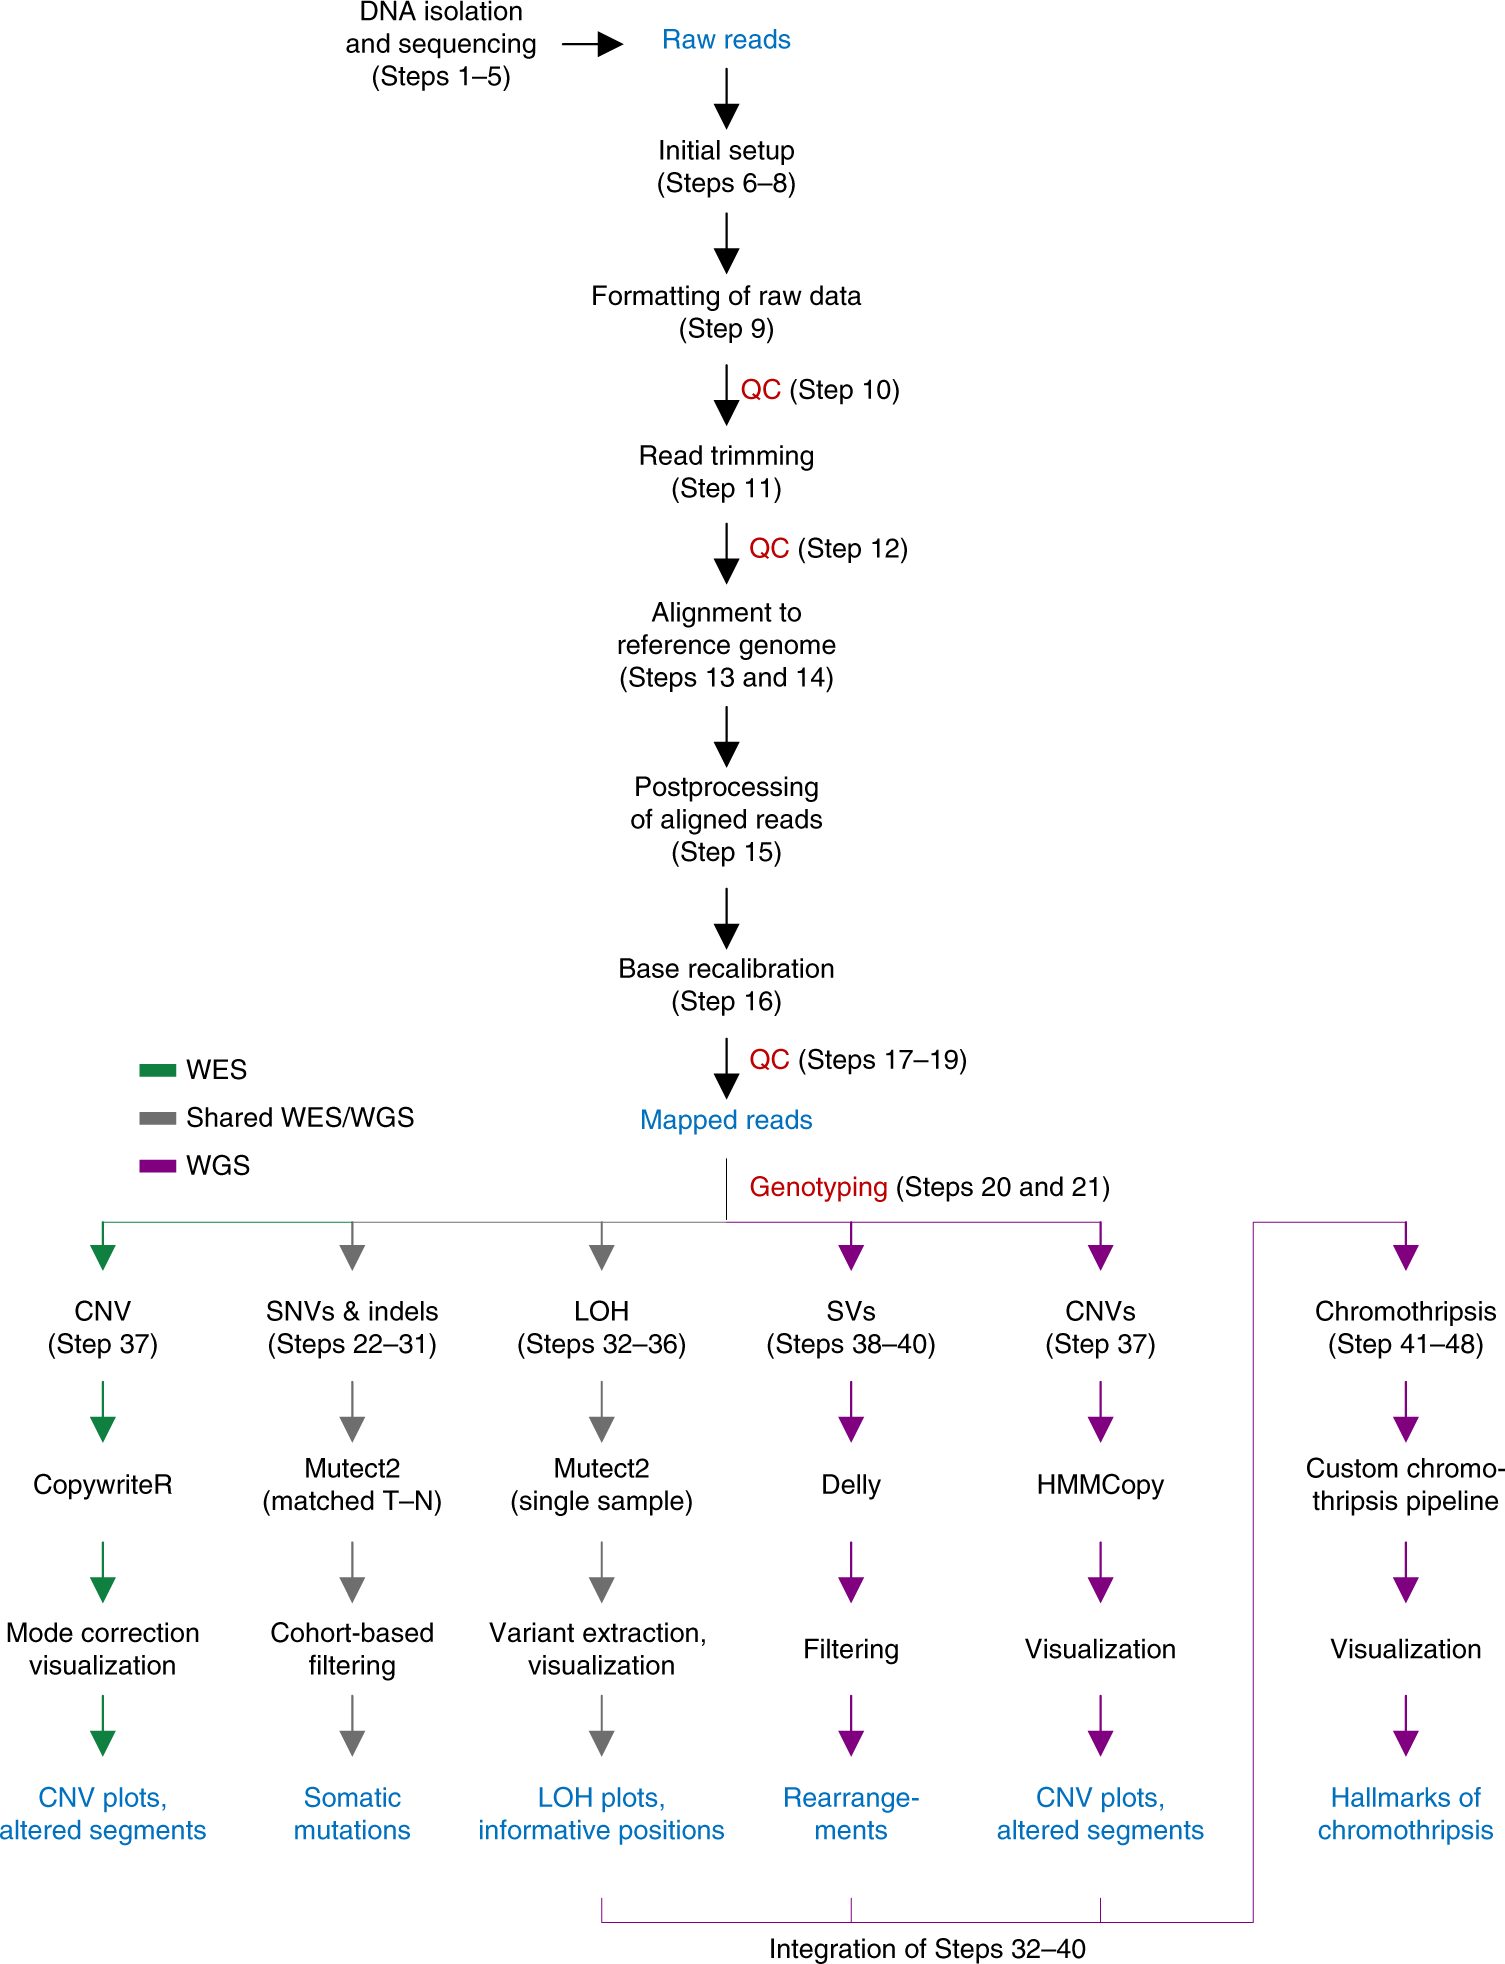 Analysis pipelines for cancer genome sequencing in mice | Nature Protocols